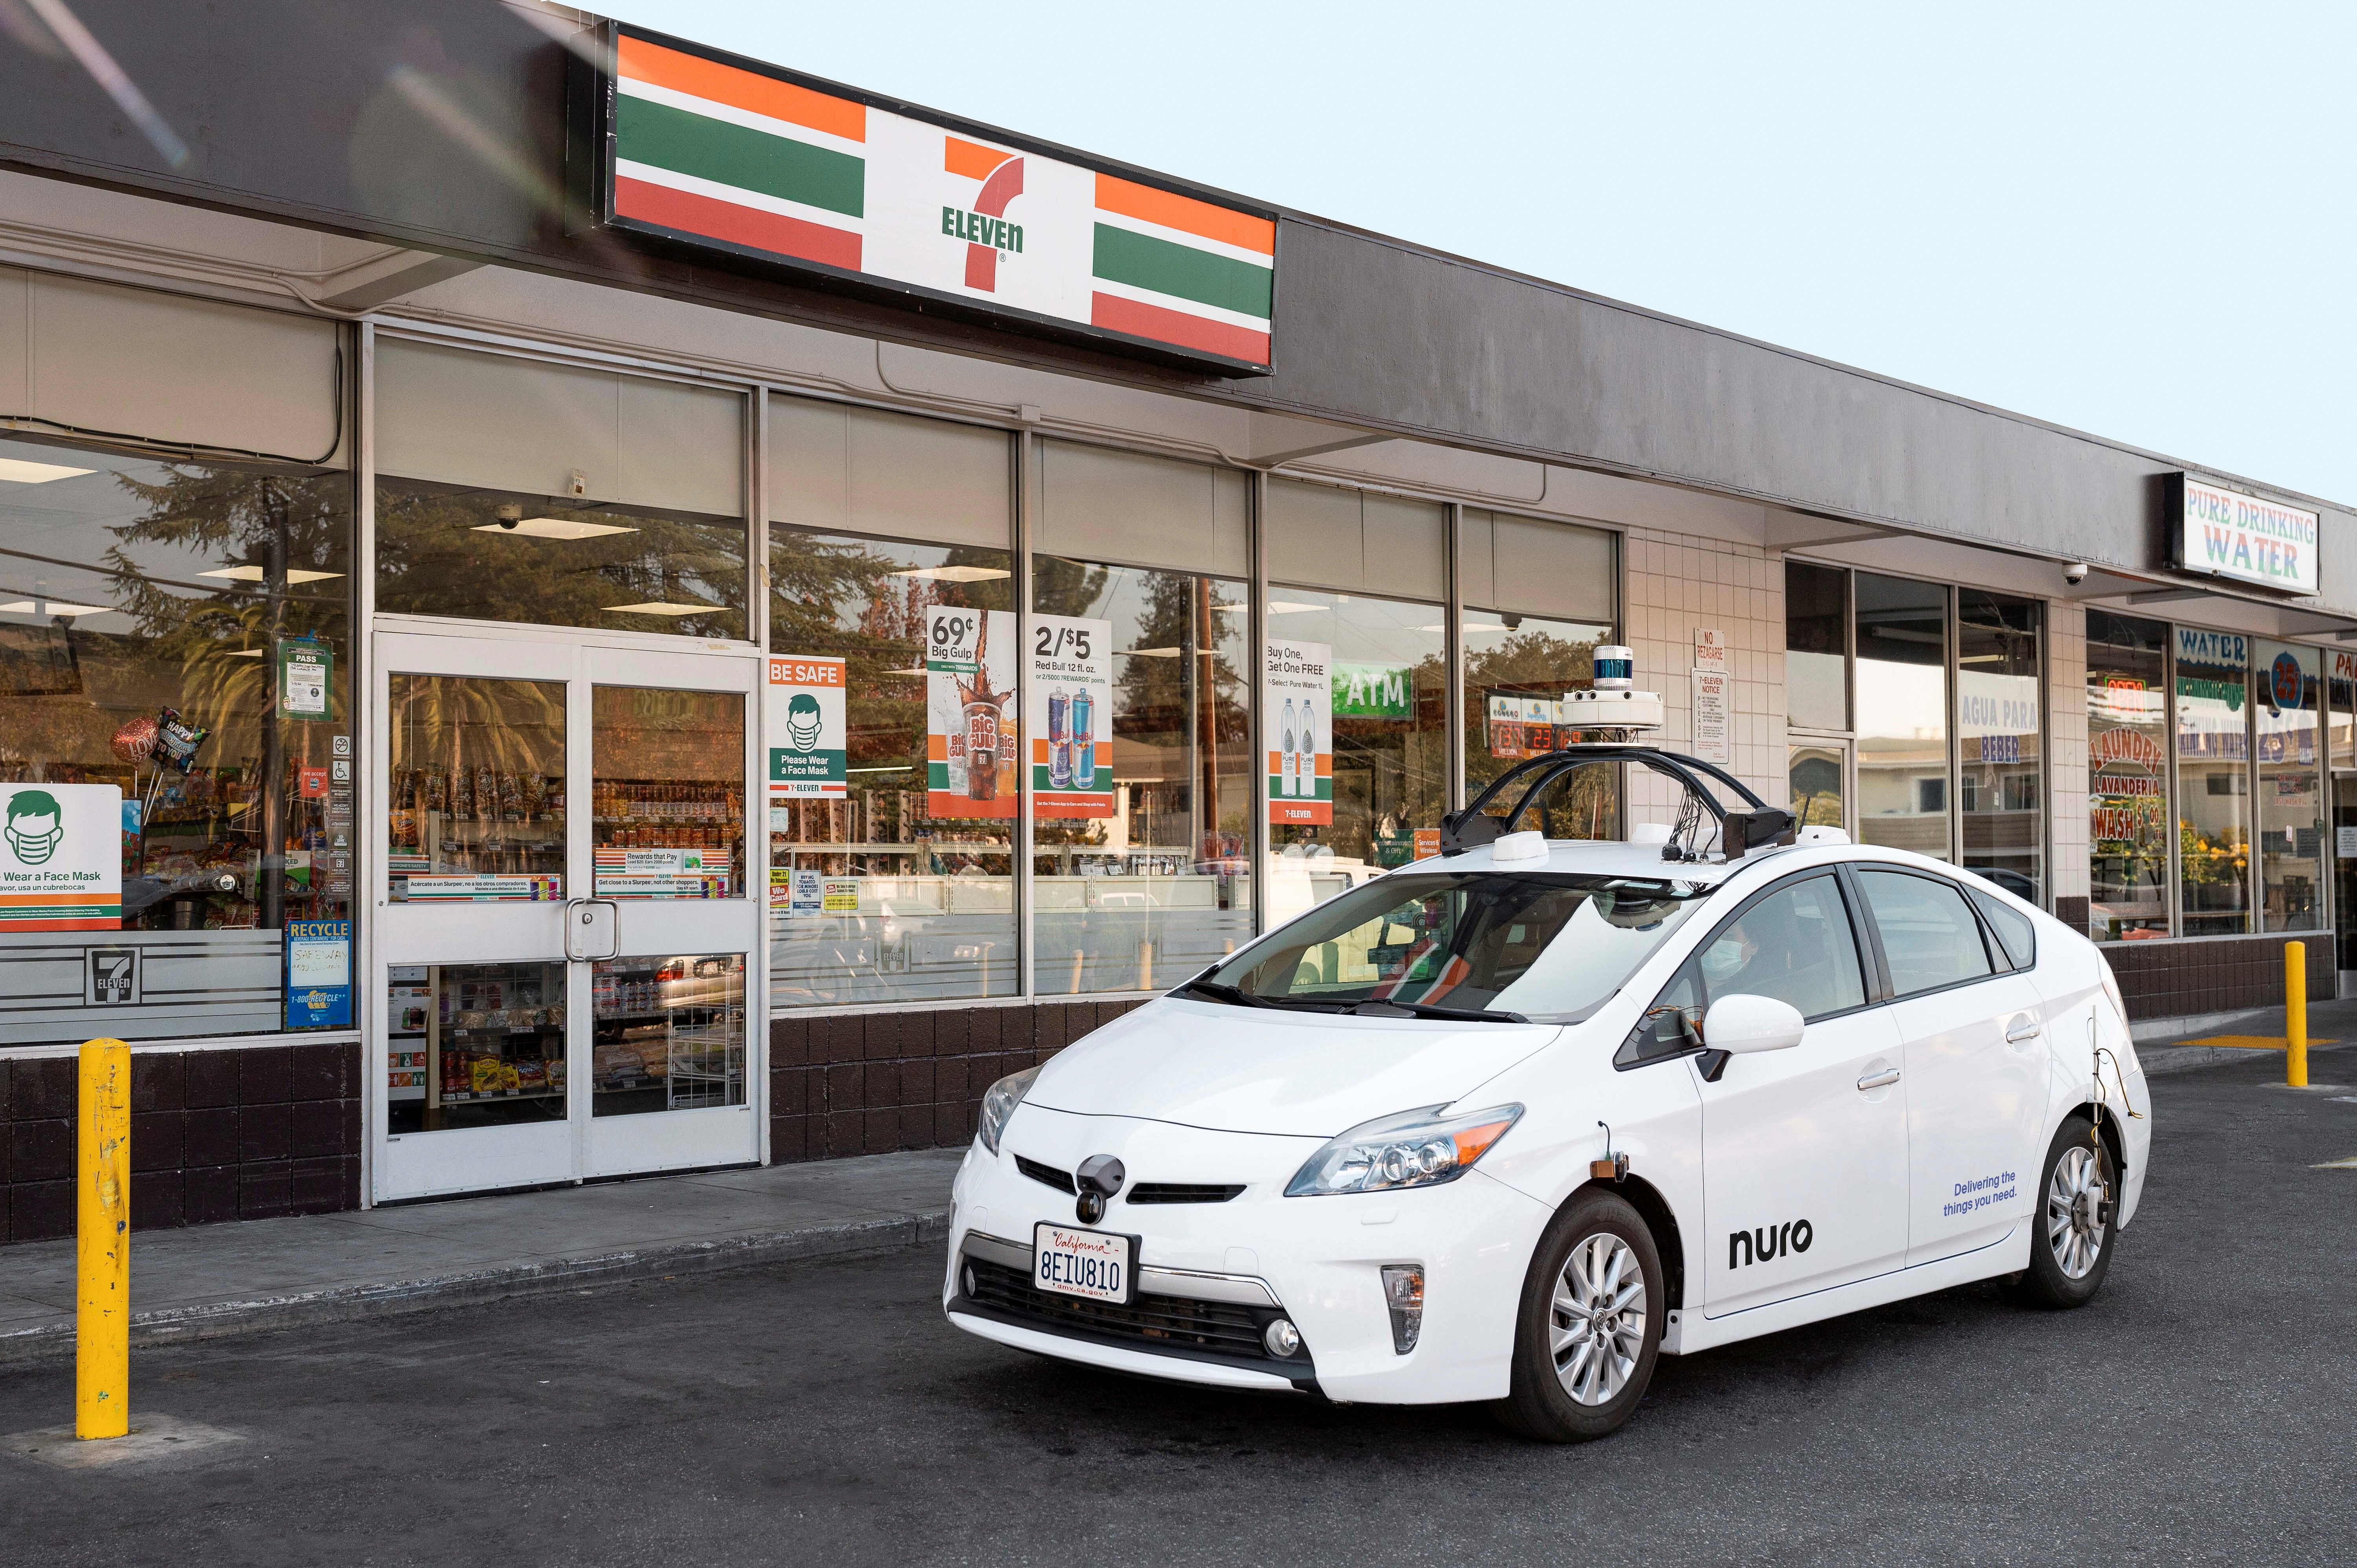 A Toyota Prius with Nuro's self driving technology is parked outside a 7-Eleven in Mountain View, California, U.S. in this undated handout photograph. Nuro/Handout via REUTERS  